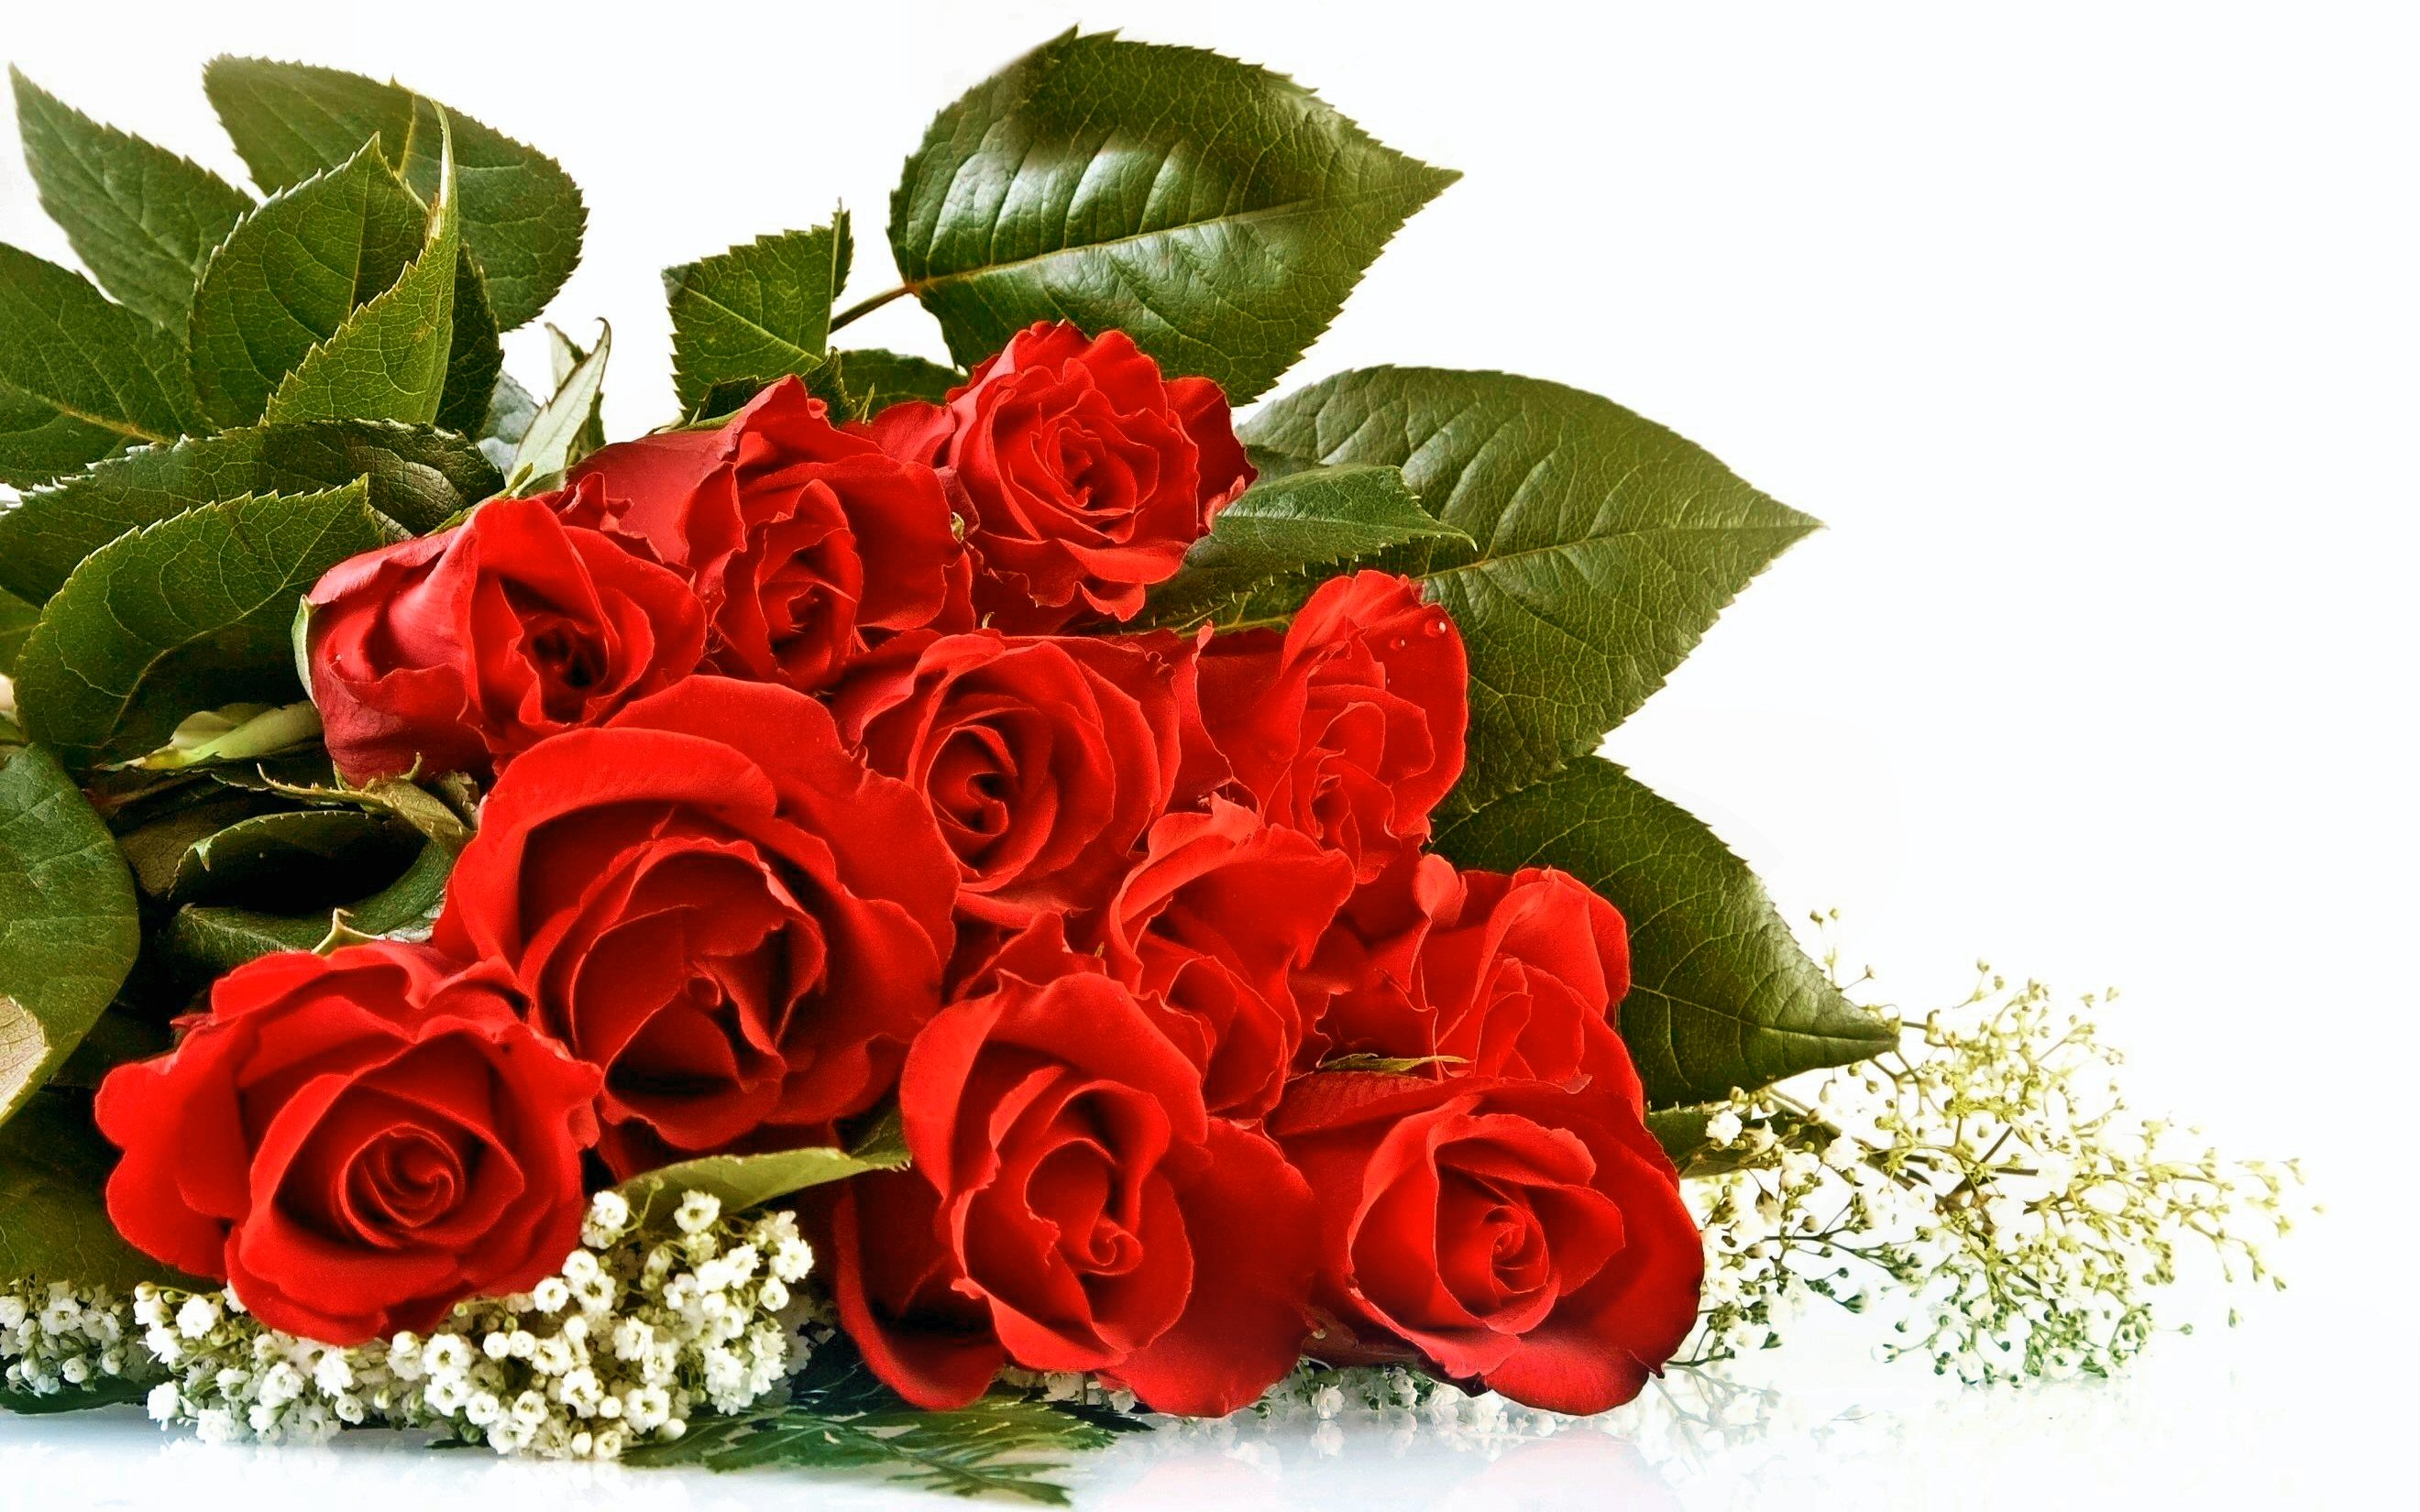 red flower, leaf, flowers, flower, rose, valentine's day, red rose, bouquet, earth